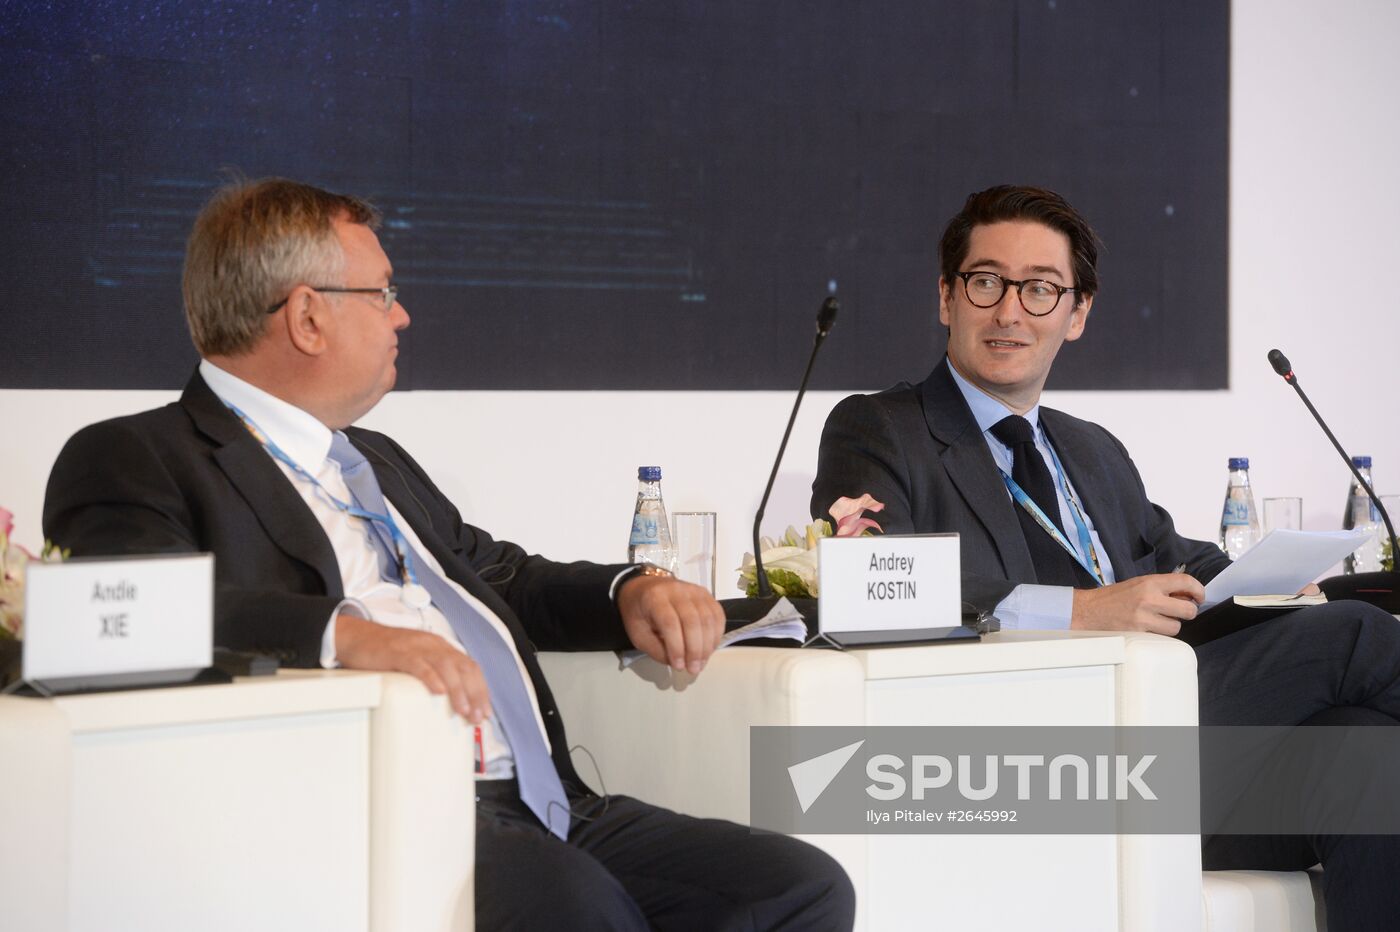 Panel Session, Global Finance as a Commons – Guarantor or Threat to Stability? as part pf SPIEF 2015